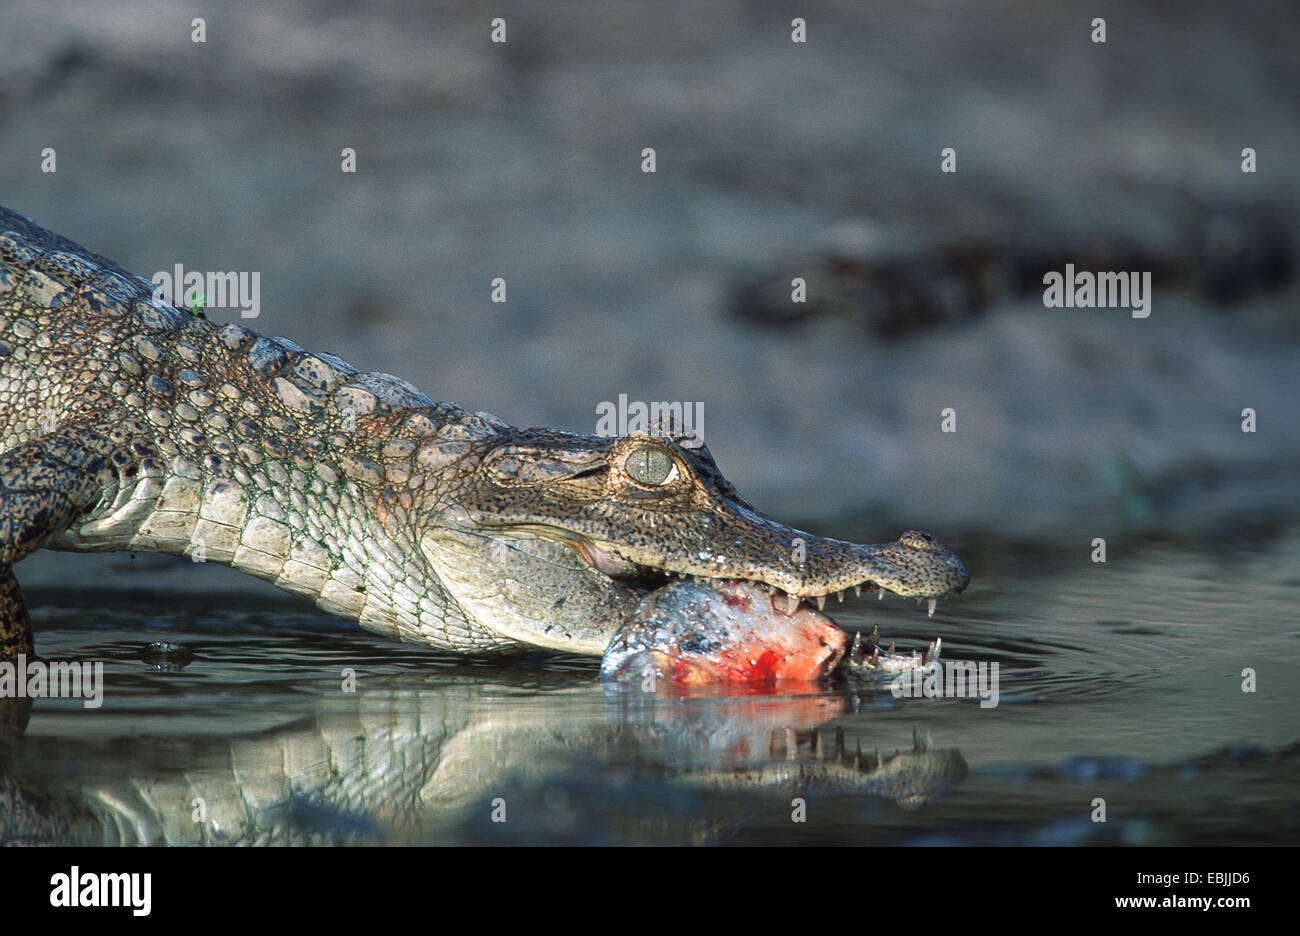 spectacled caiman (Caiman crocodilus), standing at a riverside with a caught fish in the mouth, Venezuela, Hato El cedral Stock Photo